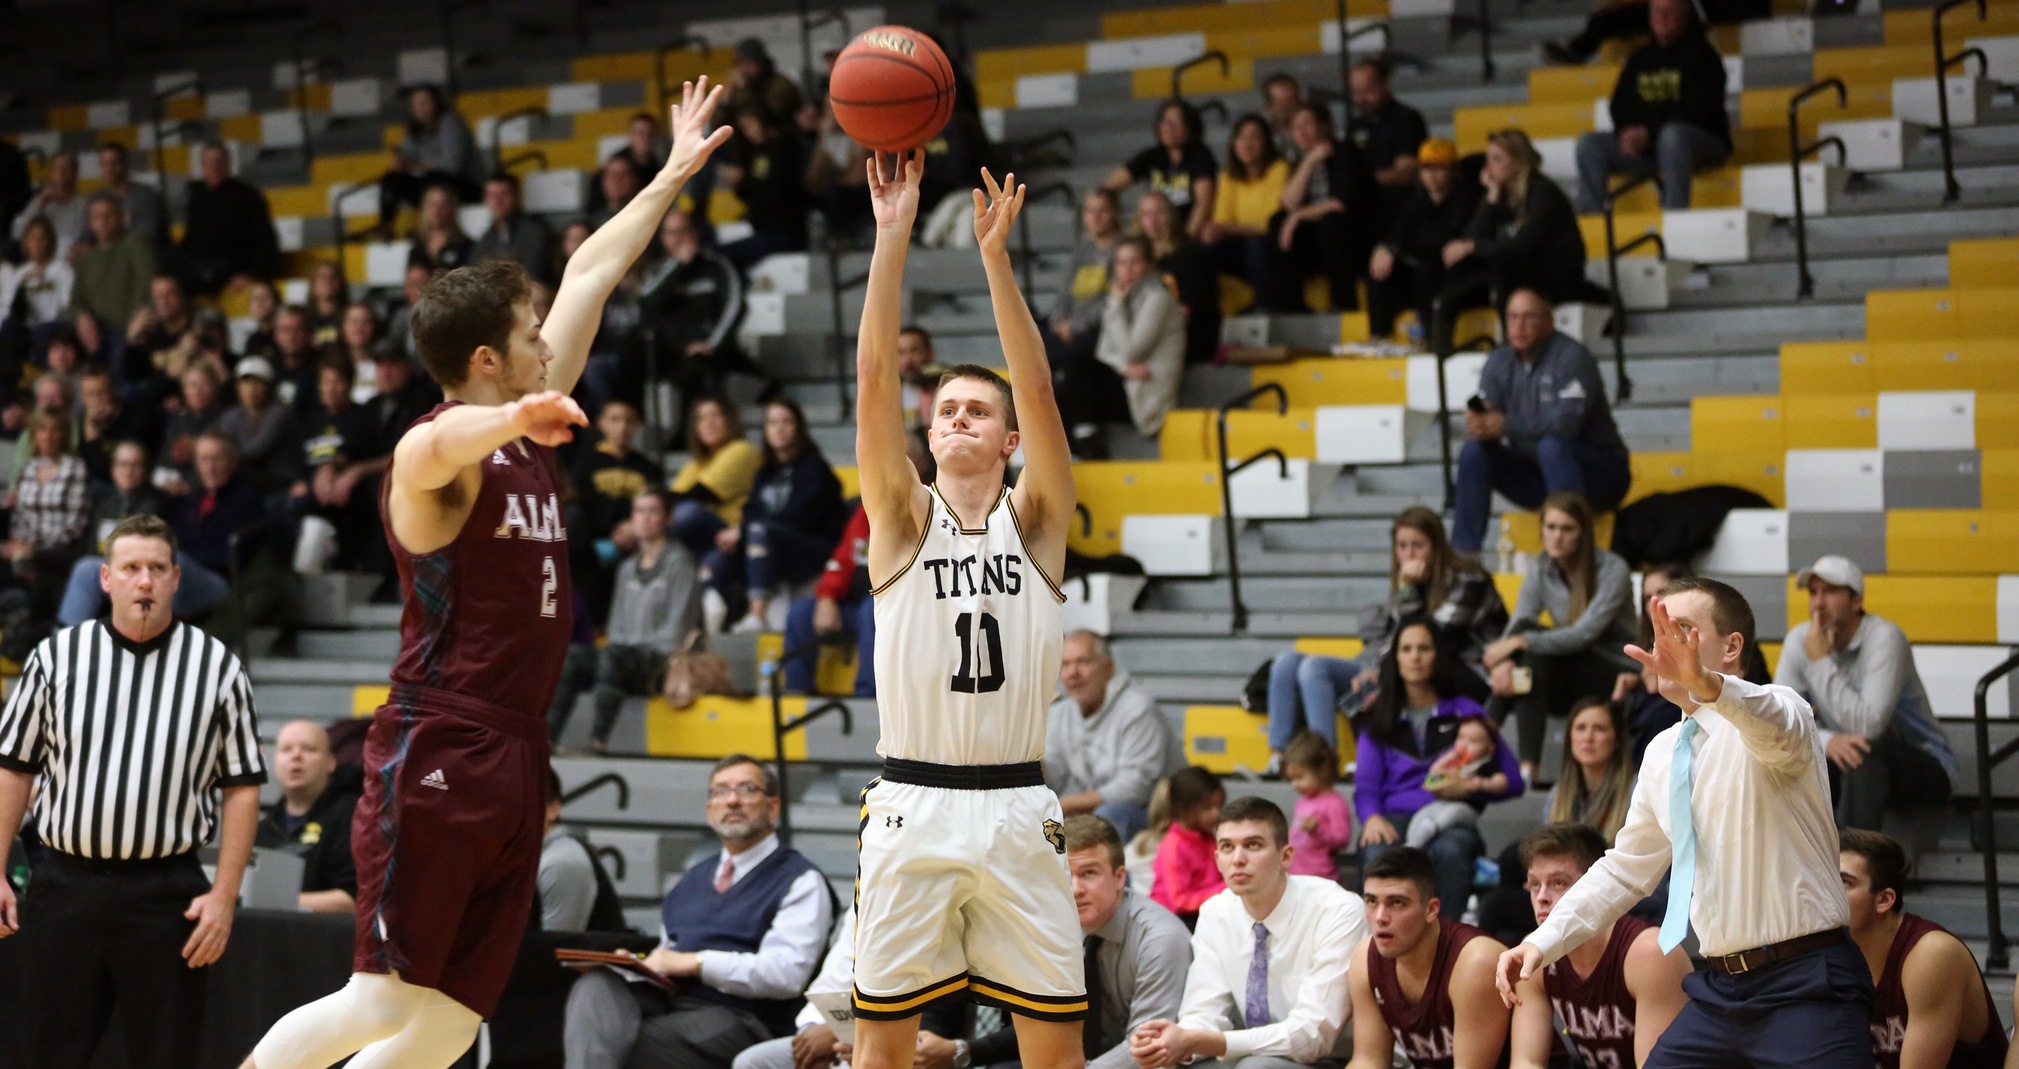 Jake Zeitler scored all nine of his points against the Scots in the first half.